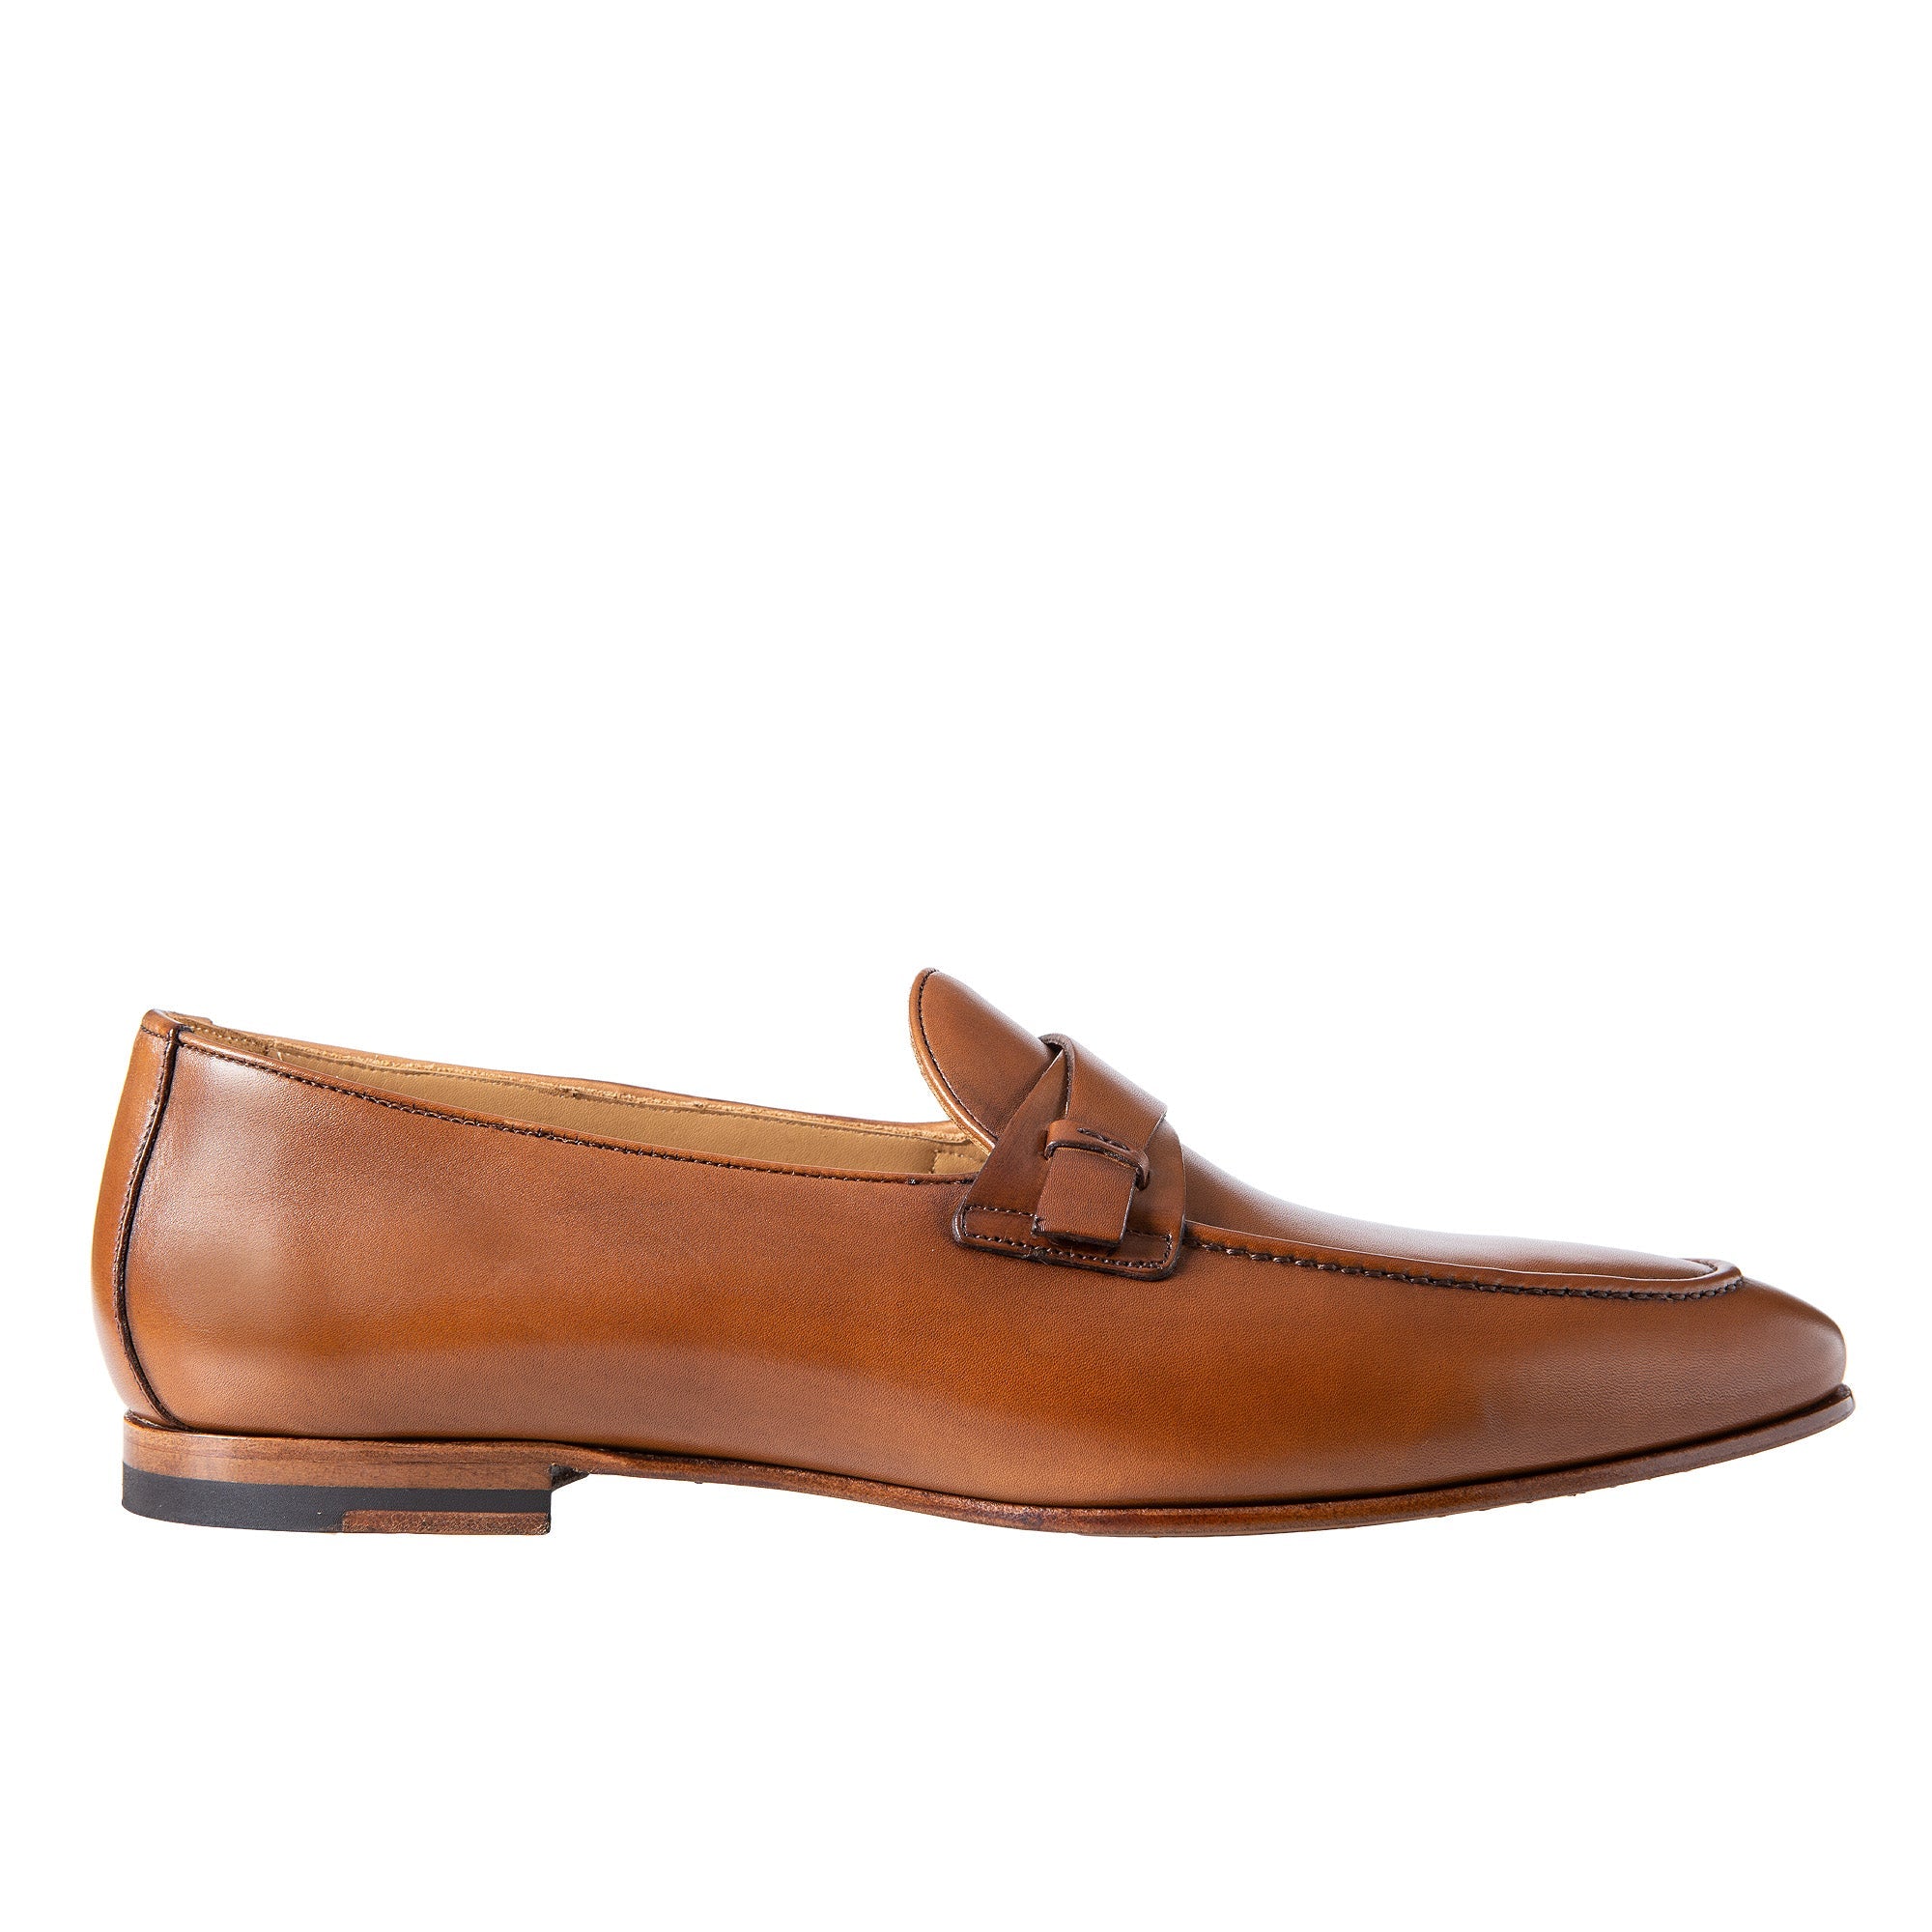 MORESCHI LOAFER LEATHER SHOES BRANDY - Henry BucksLoafers & Driving Shoes80MOR2360 - BRNDY - 6 1/2